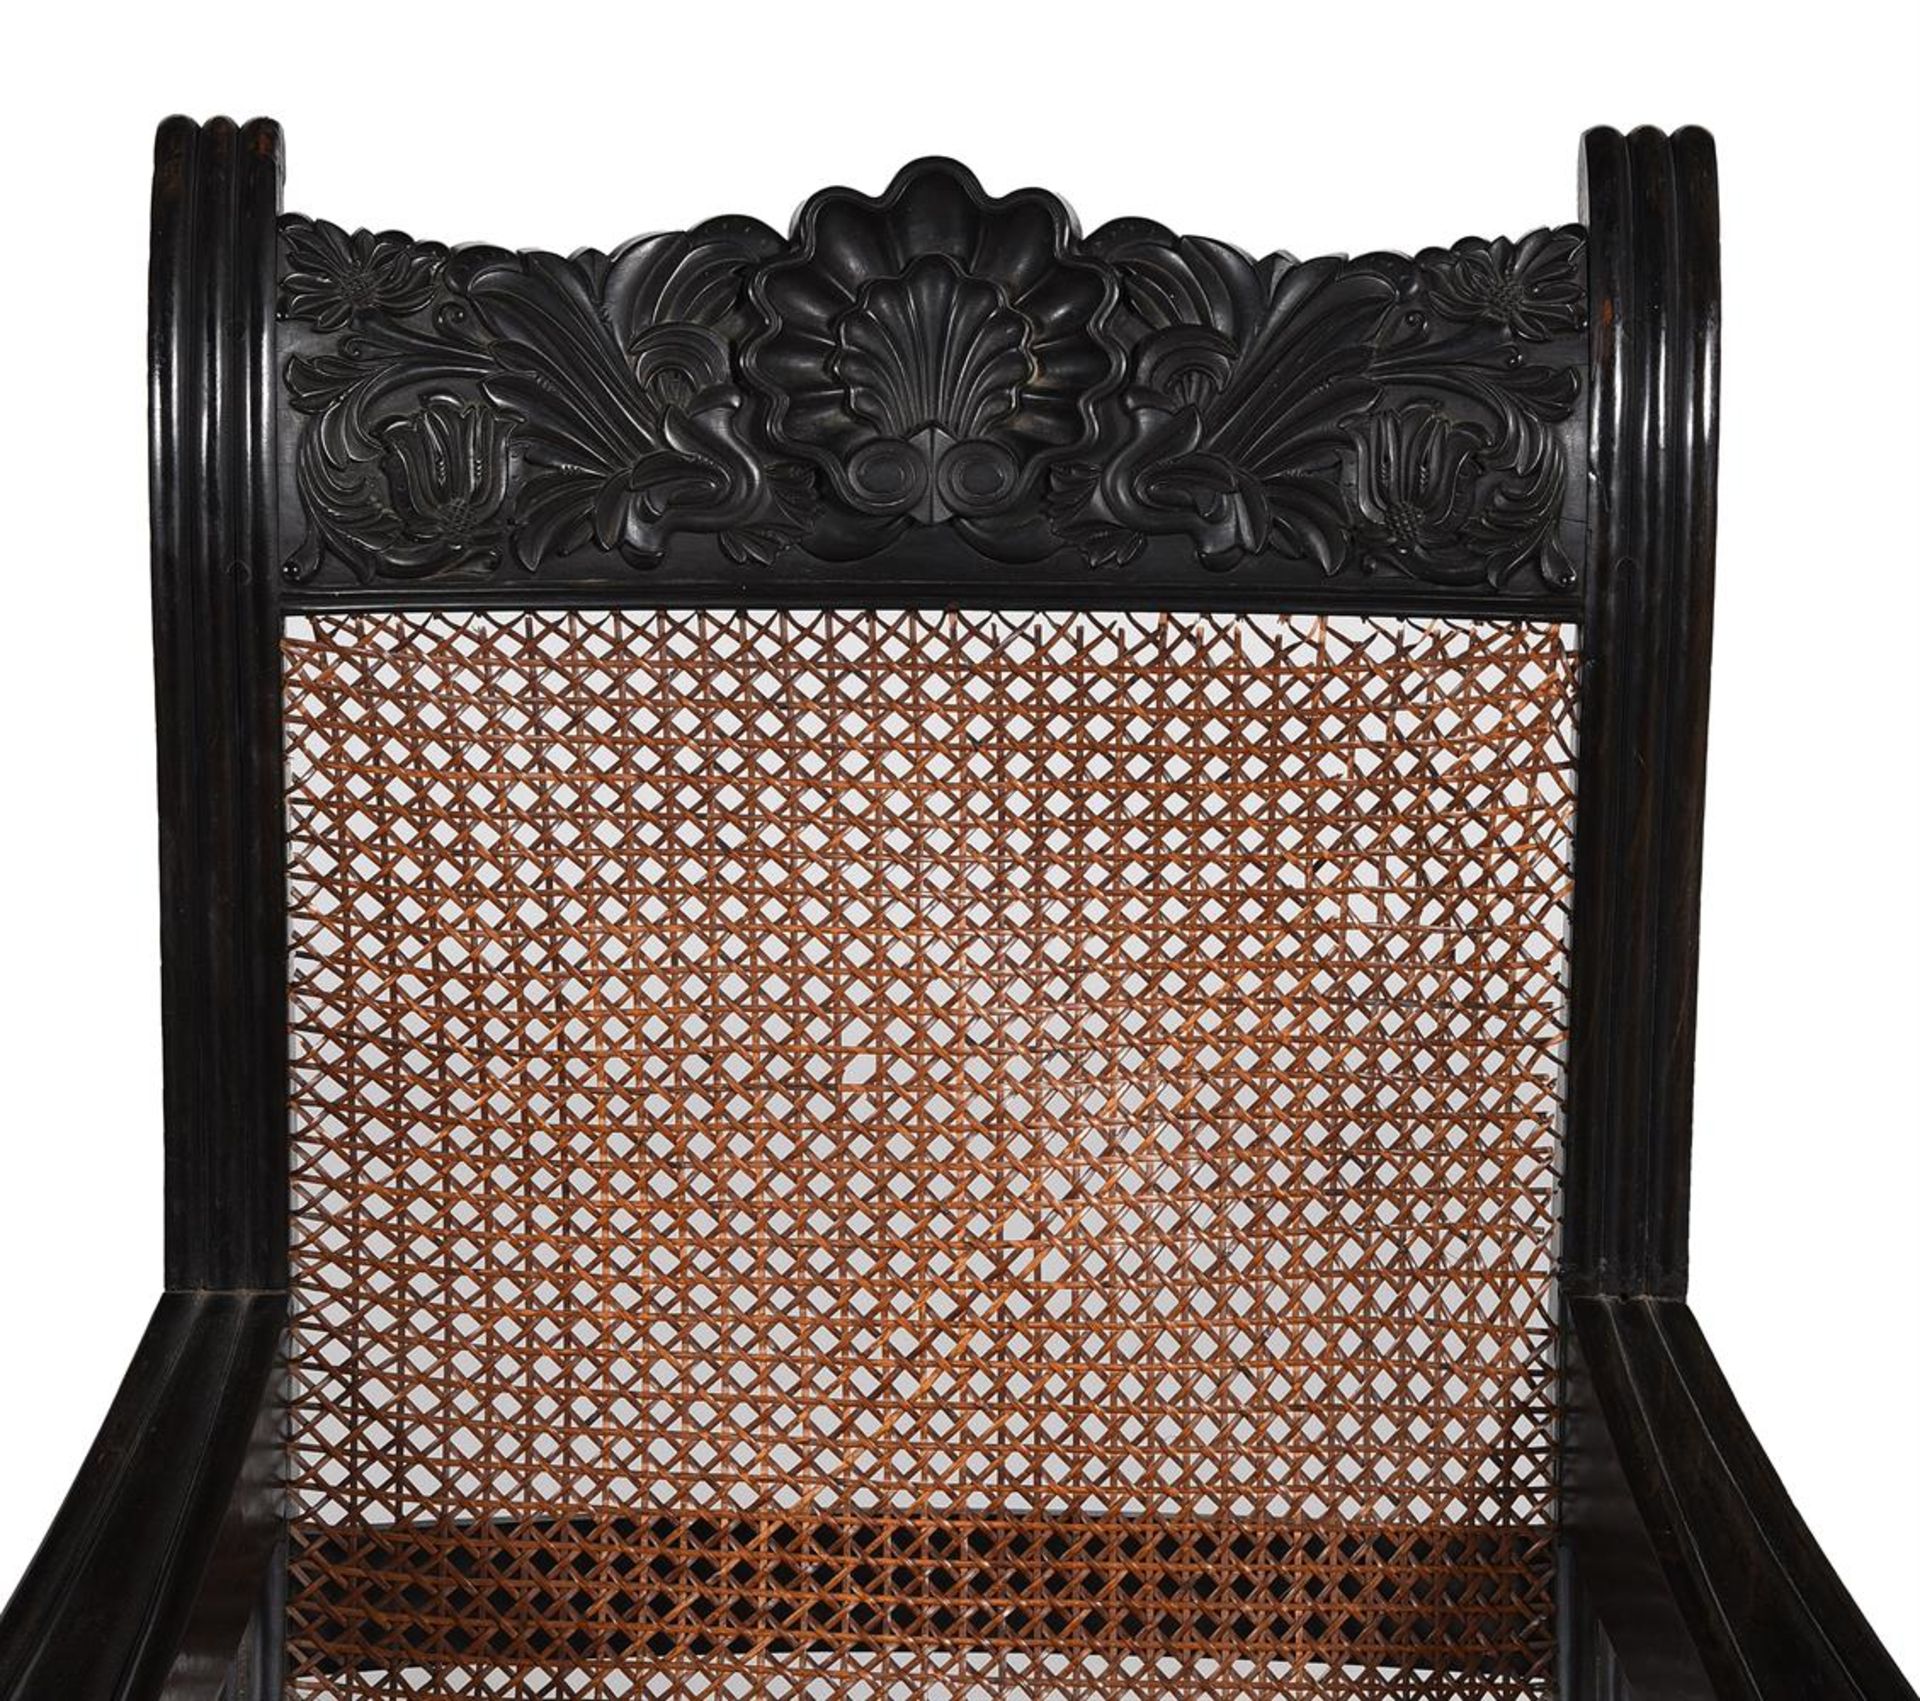 Y A NEAR PAIR OF ANGLO INDIAN CARVED EBONY ARMCHAIRS, MID 19TH CENTURY - Image 6 of 9